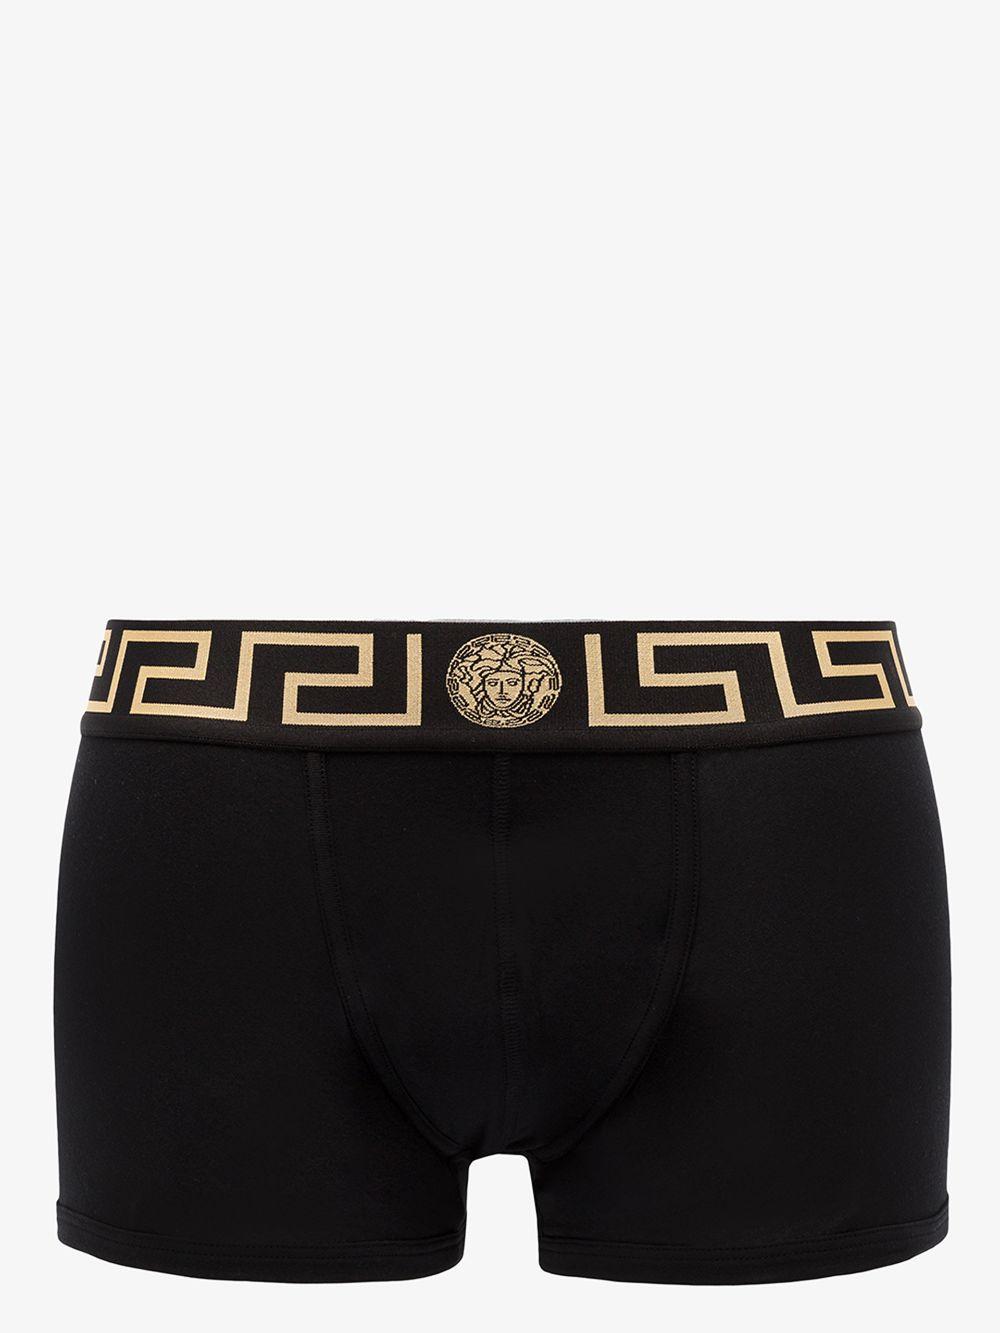 Versace Cotton Two Piece Set Logo Boxers in Black for Men - Save 43% - Lyst